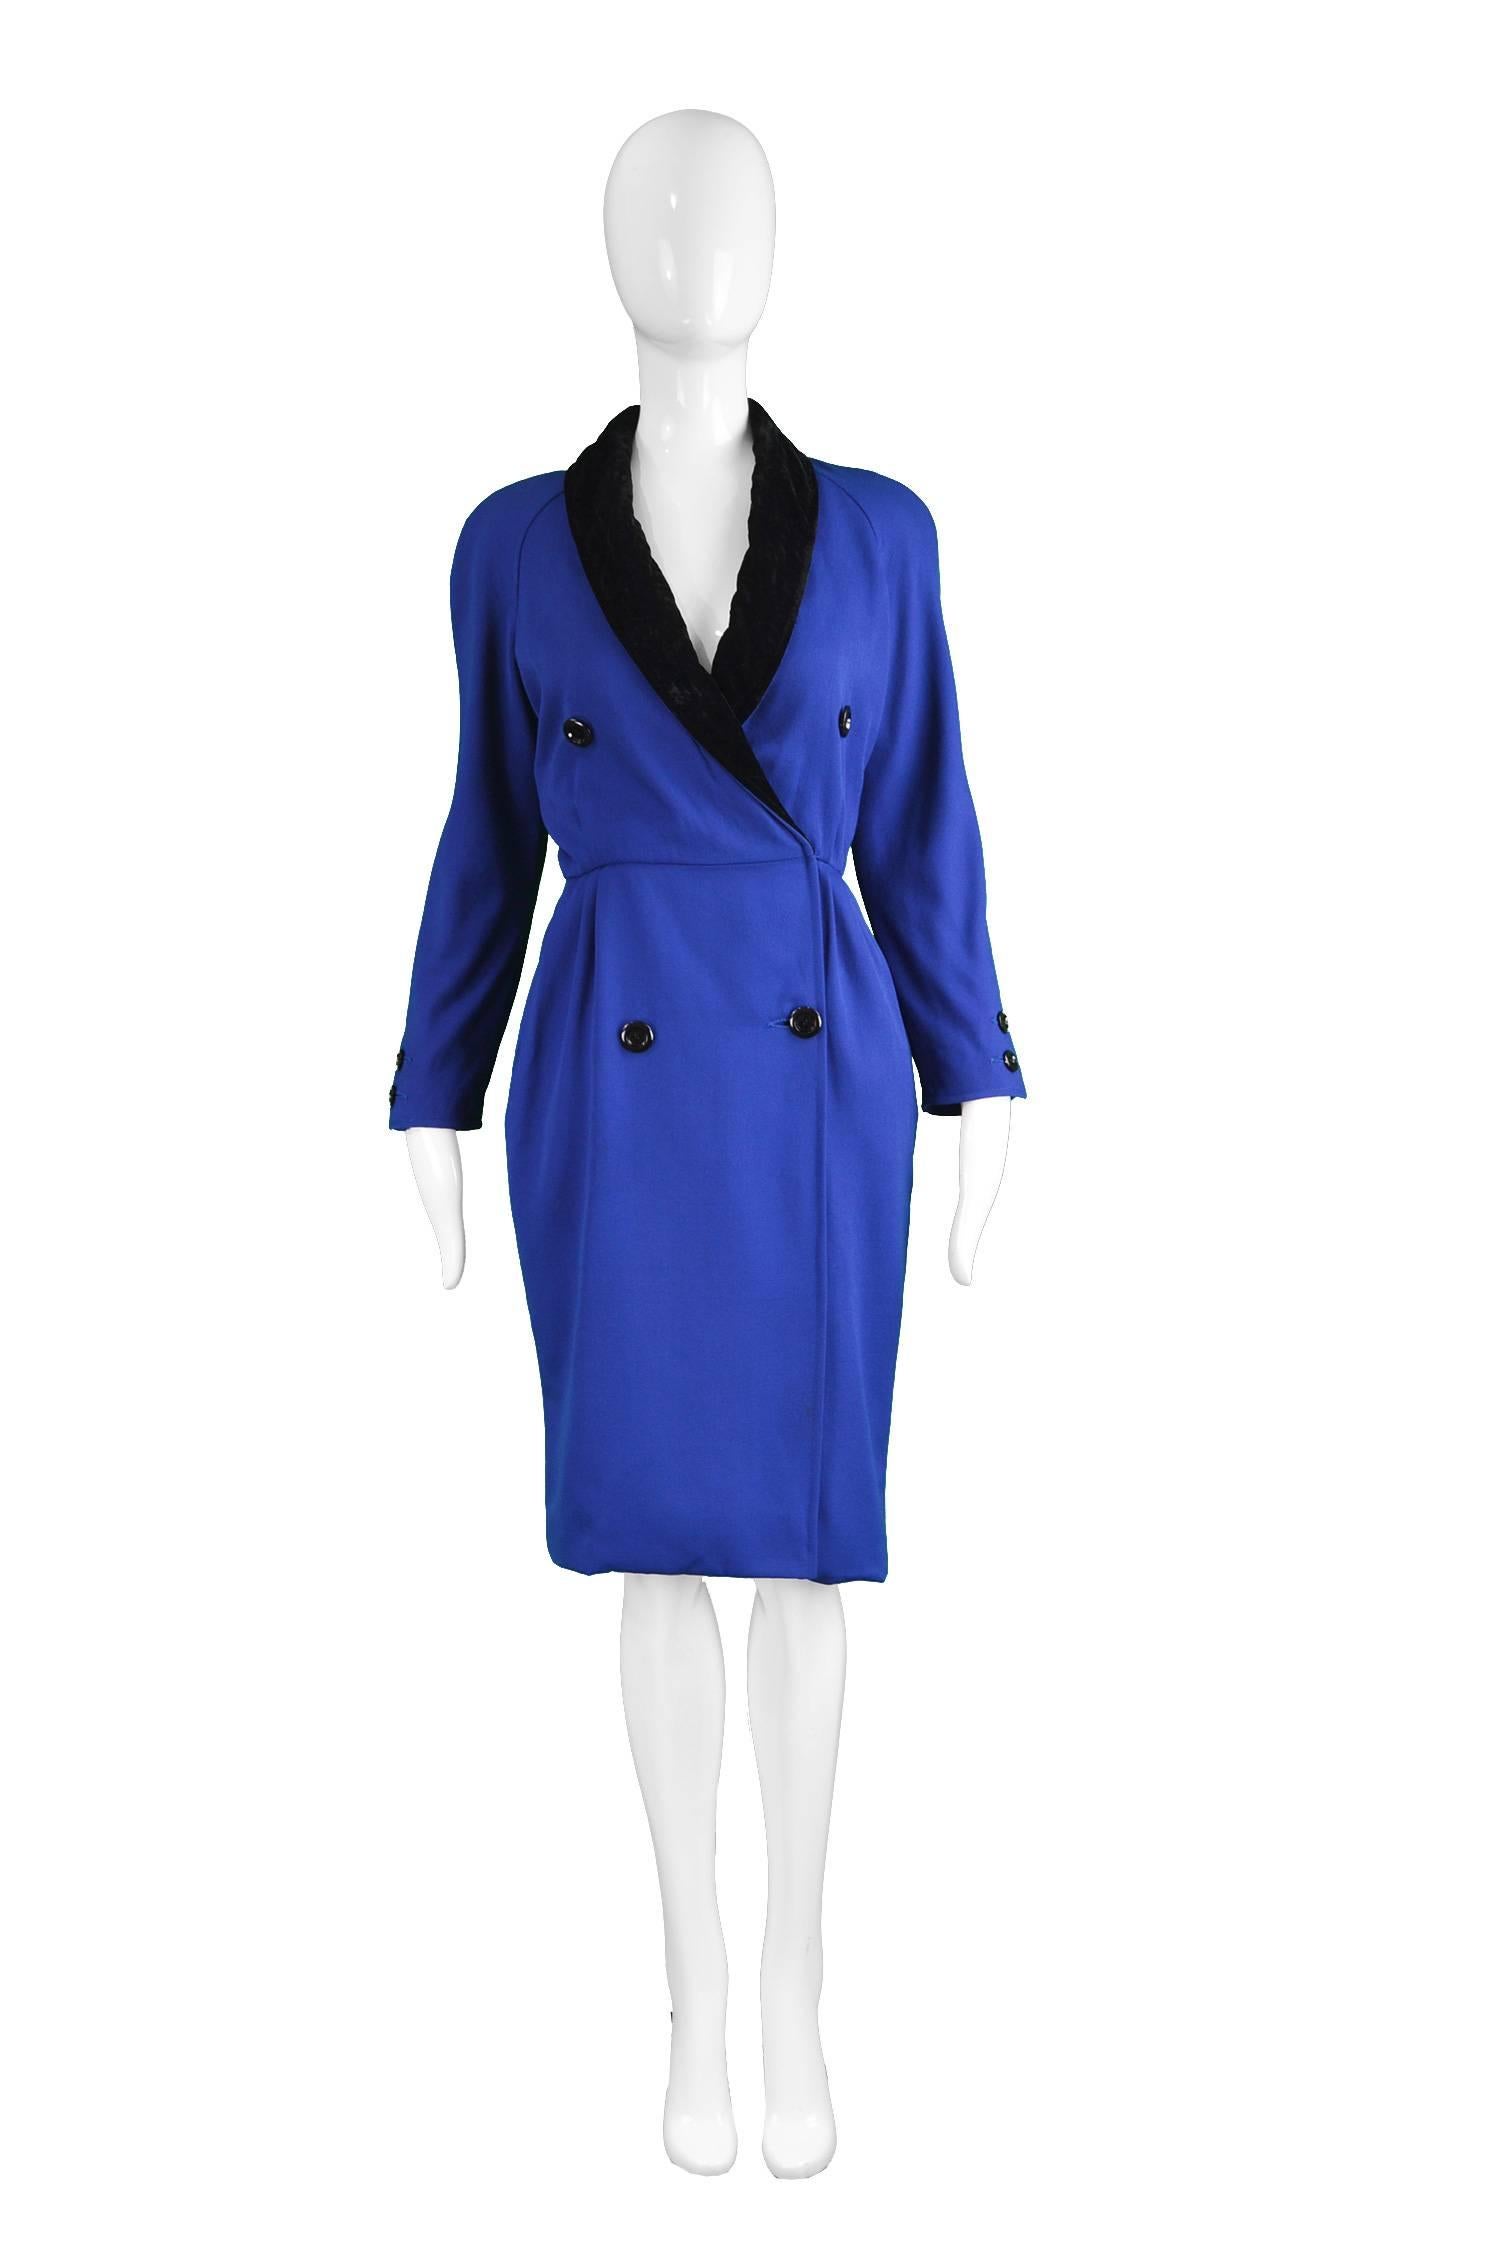 Valentino Vintage Blue Wool Dress with Black Velvet Shawl Collar, 1980s

Estimated Size: UK 8/ US 4/ EU 36. Please check measurements. 
Bust - up to 36” / 91cm (meant to have a looser fit on top)
Waist - 26” / 66cm
Hips - 36” / 91cm
Length (Shoulder